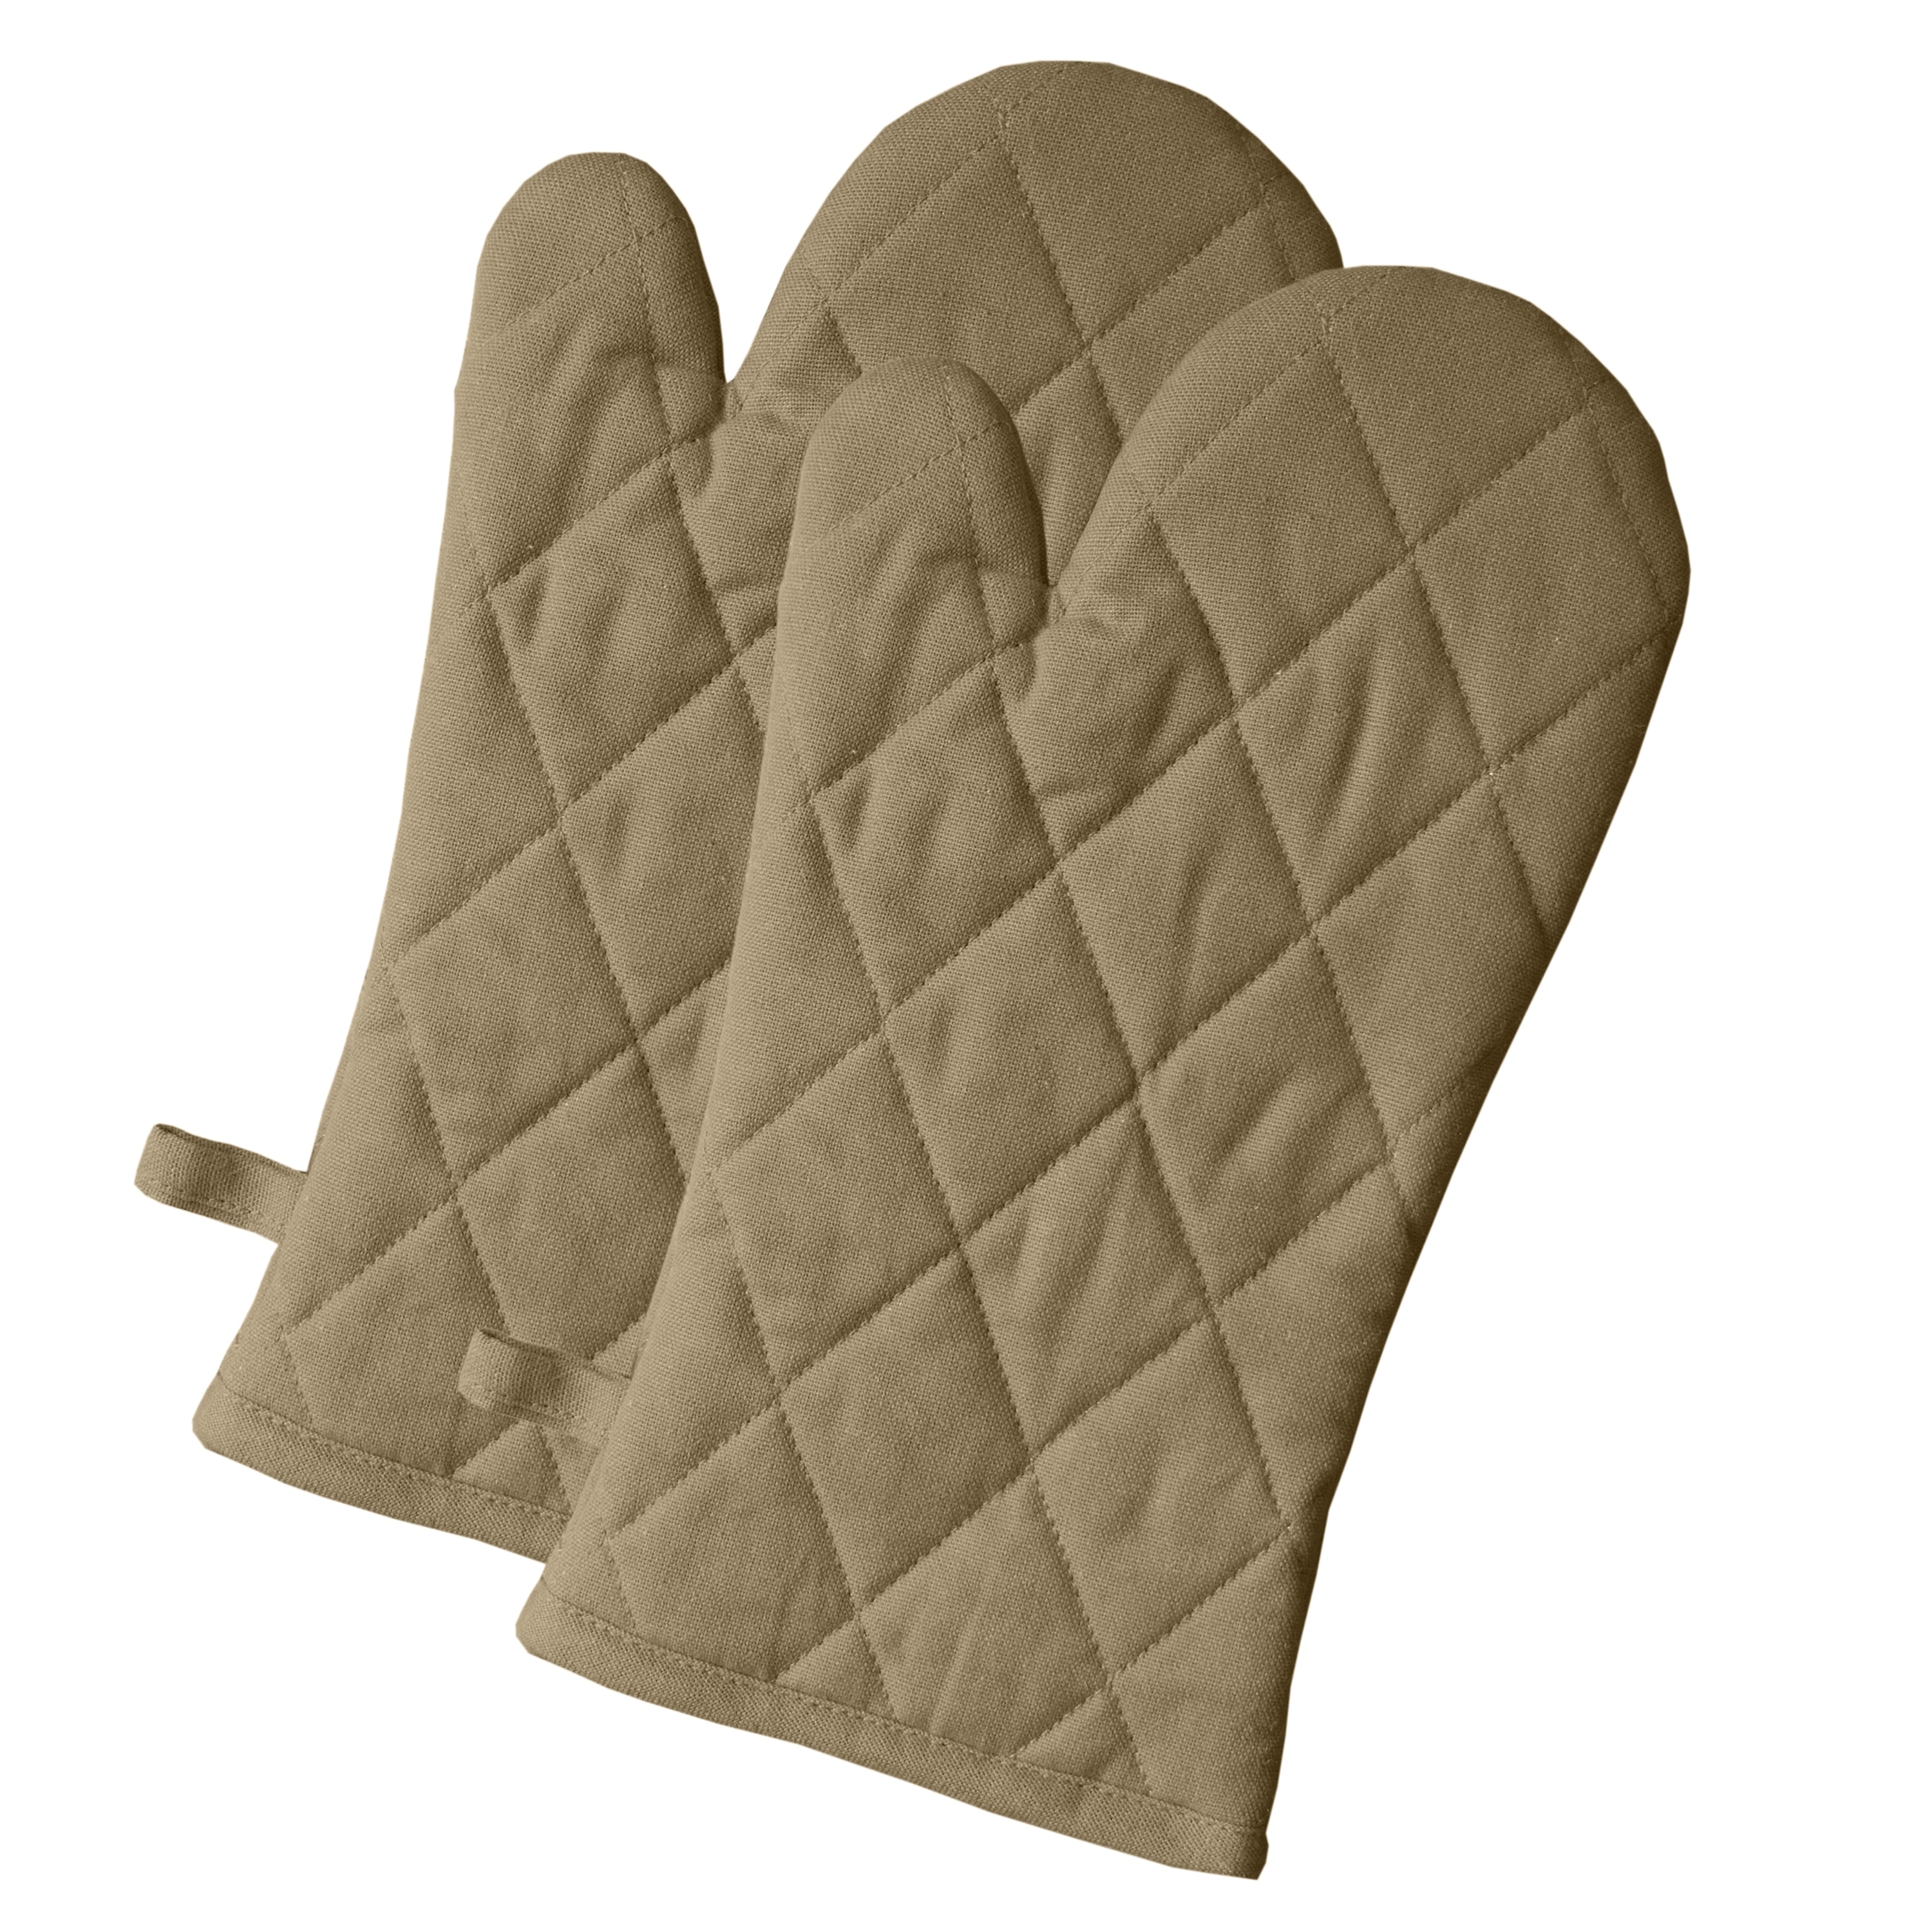 https://ak1.ostkcdn.com/images/products/is/images/direct/616b4b36e70e76b8a0ea00c0fb125691ebbea2c4/Fabstyles-Solo-Waffle-Cotton-Oven-Mitt-%26-Pot-Holder-Set-of-4.jpg